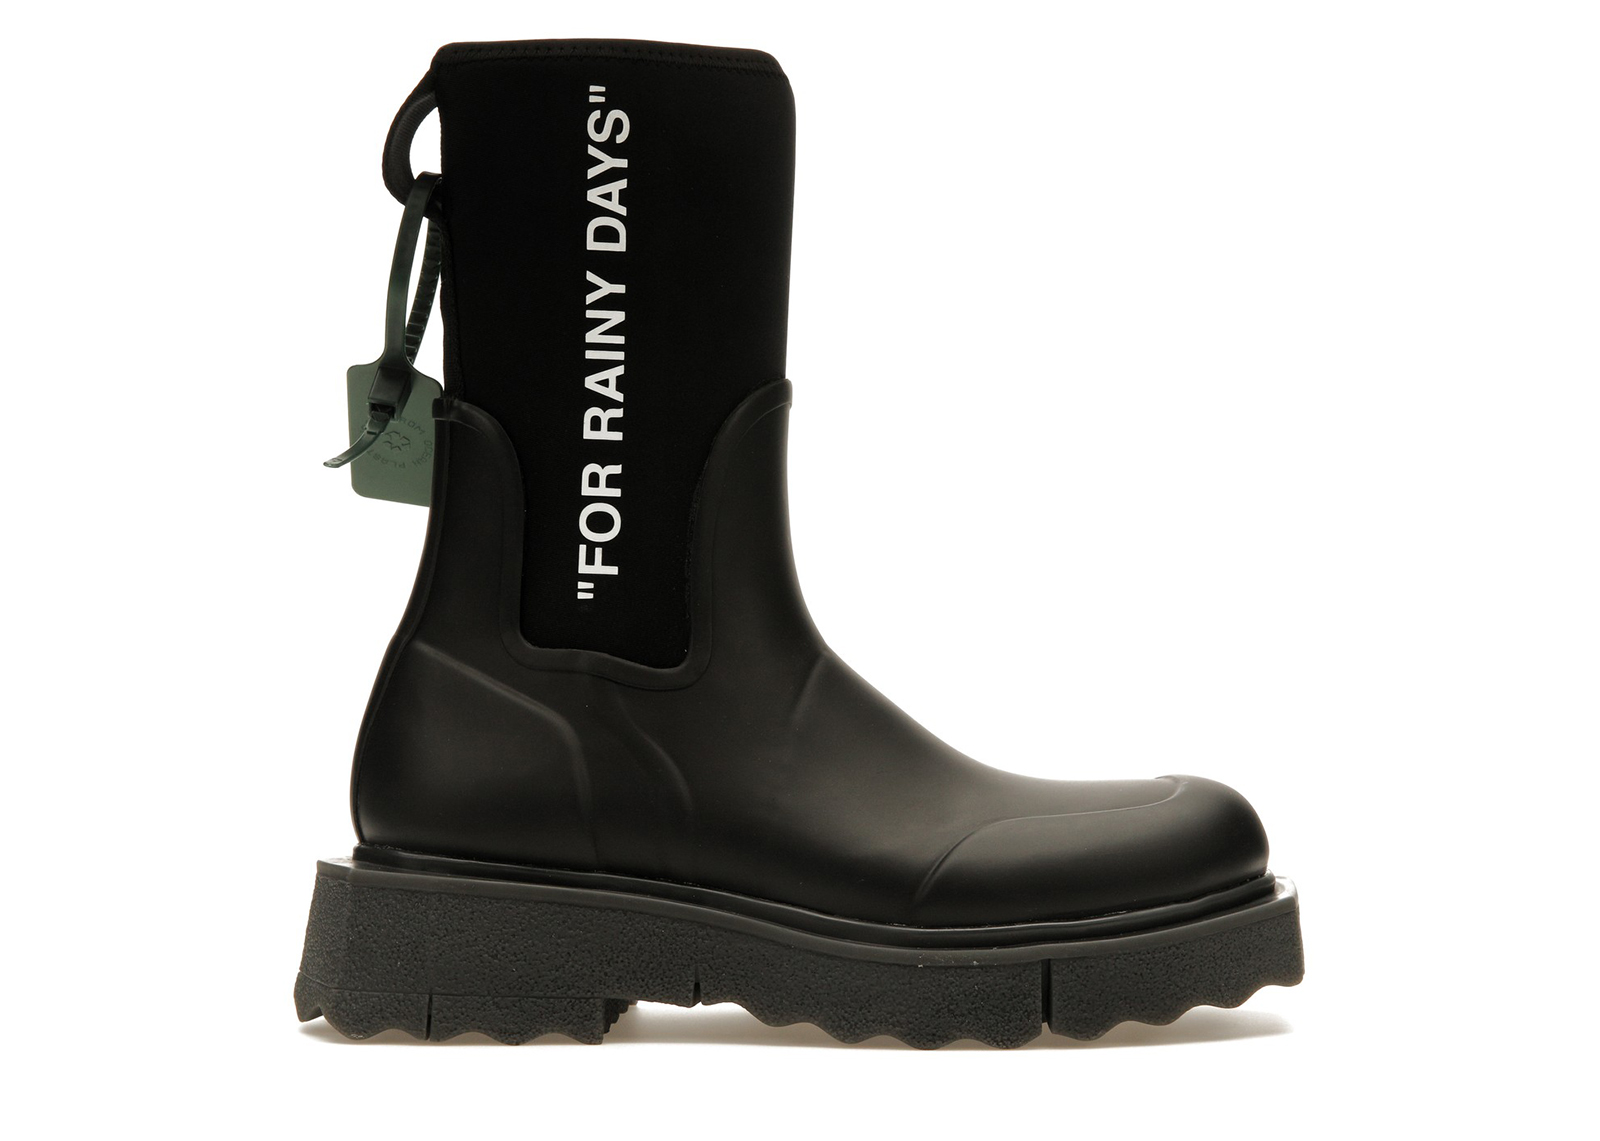 OFF-WHITE For Rainy Days Rain Boot Black (Women's) - OWIE016F22MAT0011001 -  US